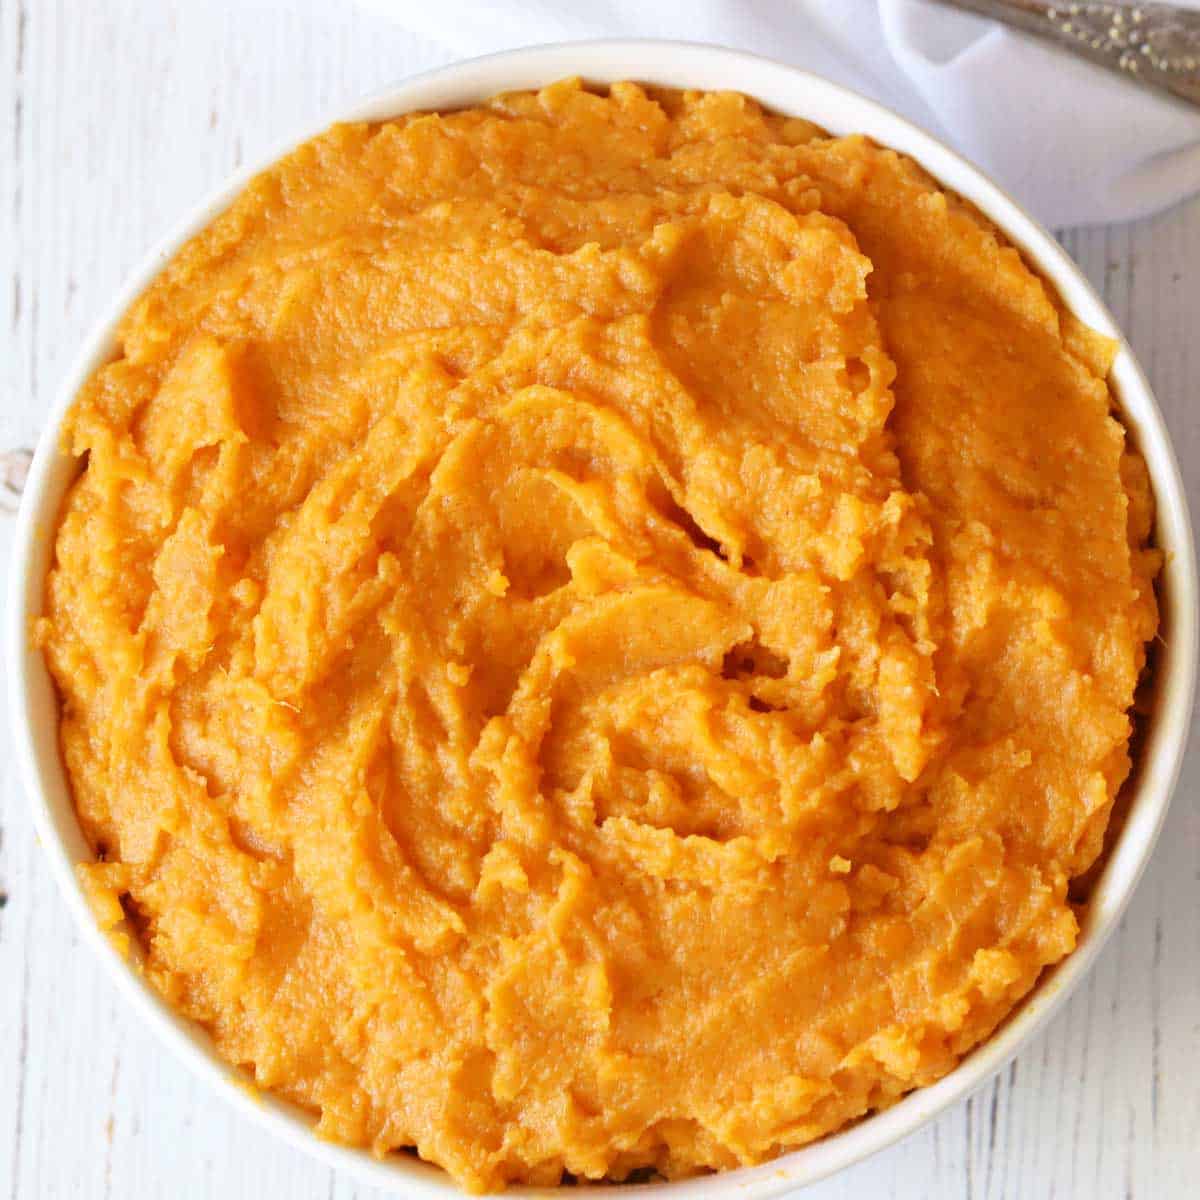 Mashed sweet potatoes are served in a white bowl.